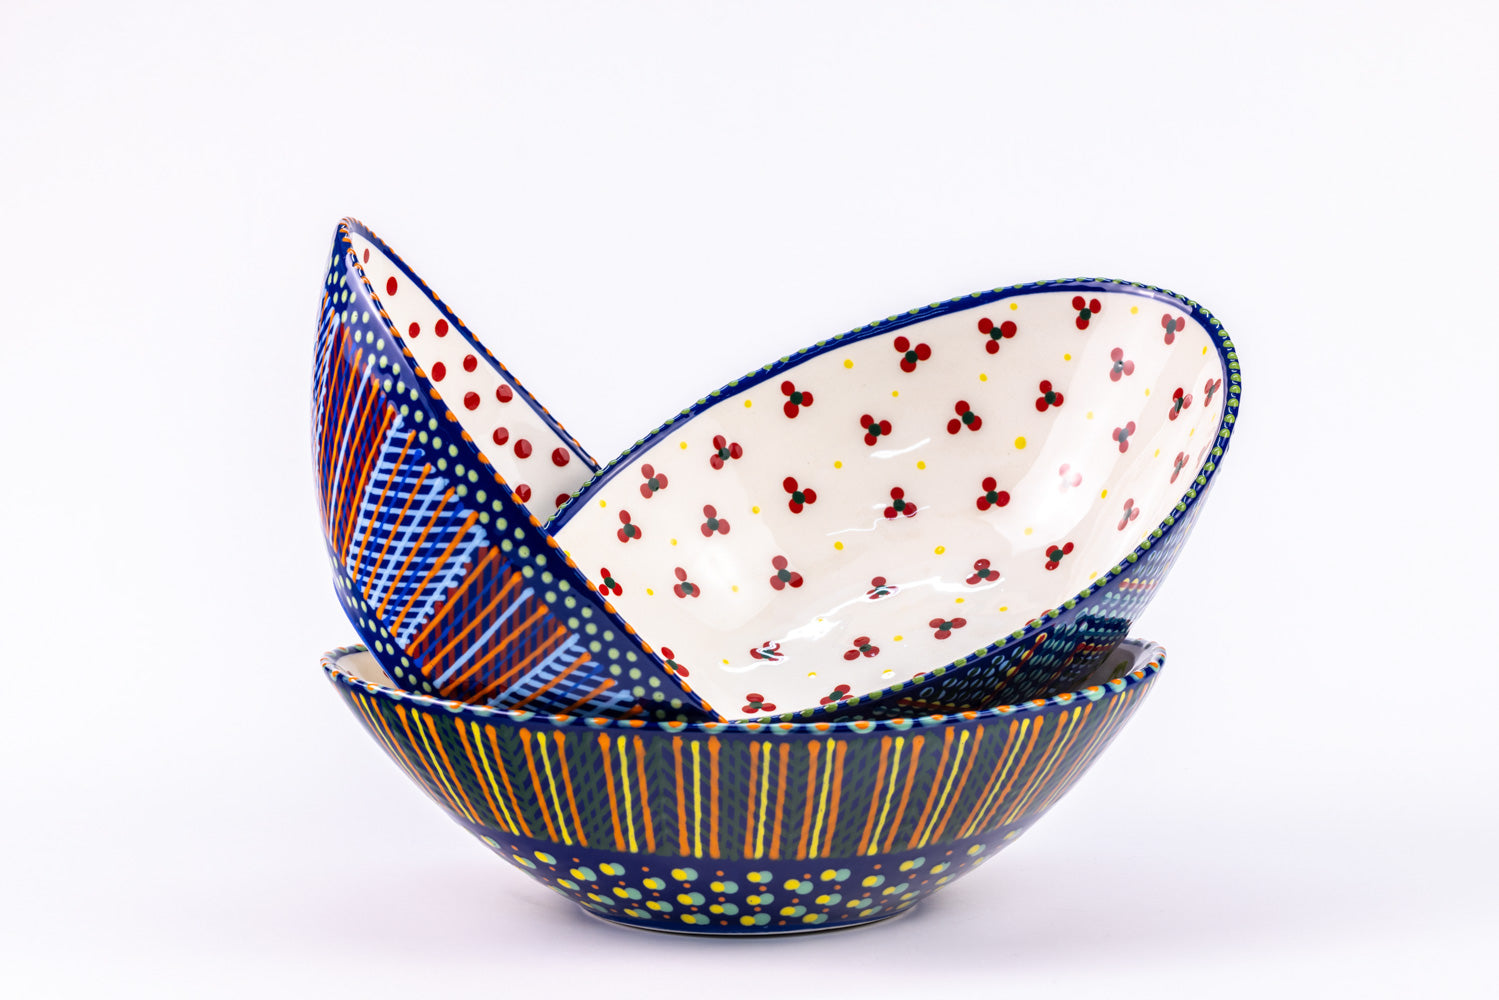 3 stacked ceramic oval serving bowls with Indigo Blue base color with dots & stripes on top in colors of red, yellow, orange, turquoise & green. Inside of one bowl is sweetly painted with red 'dot' flowers and yellow dots.